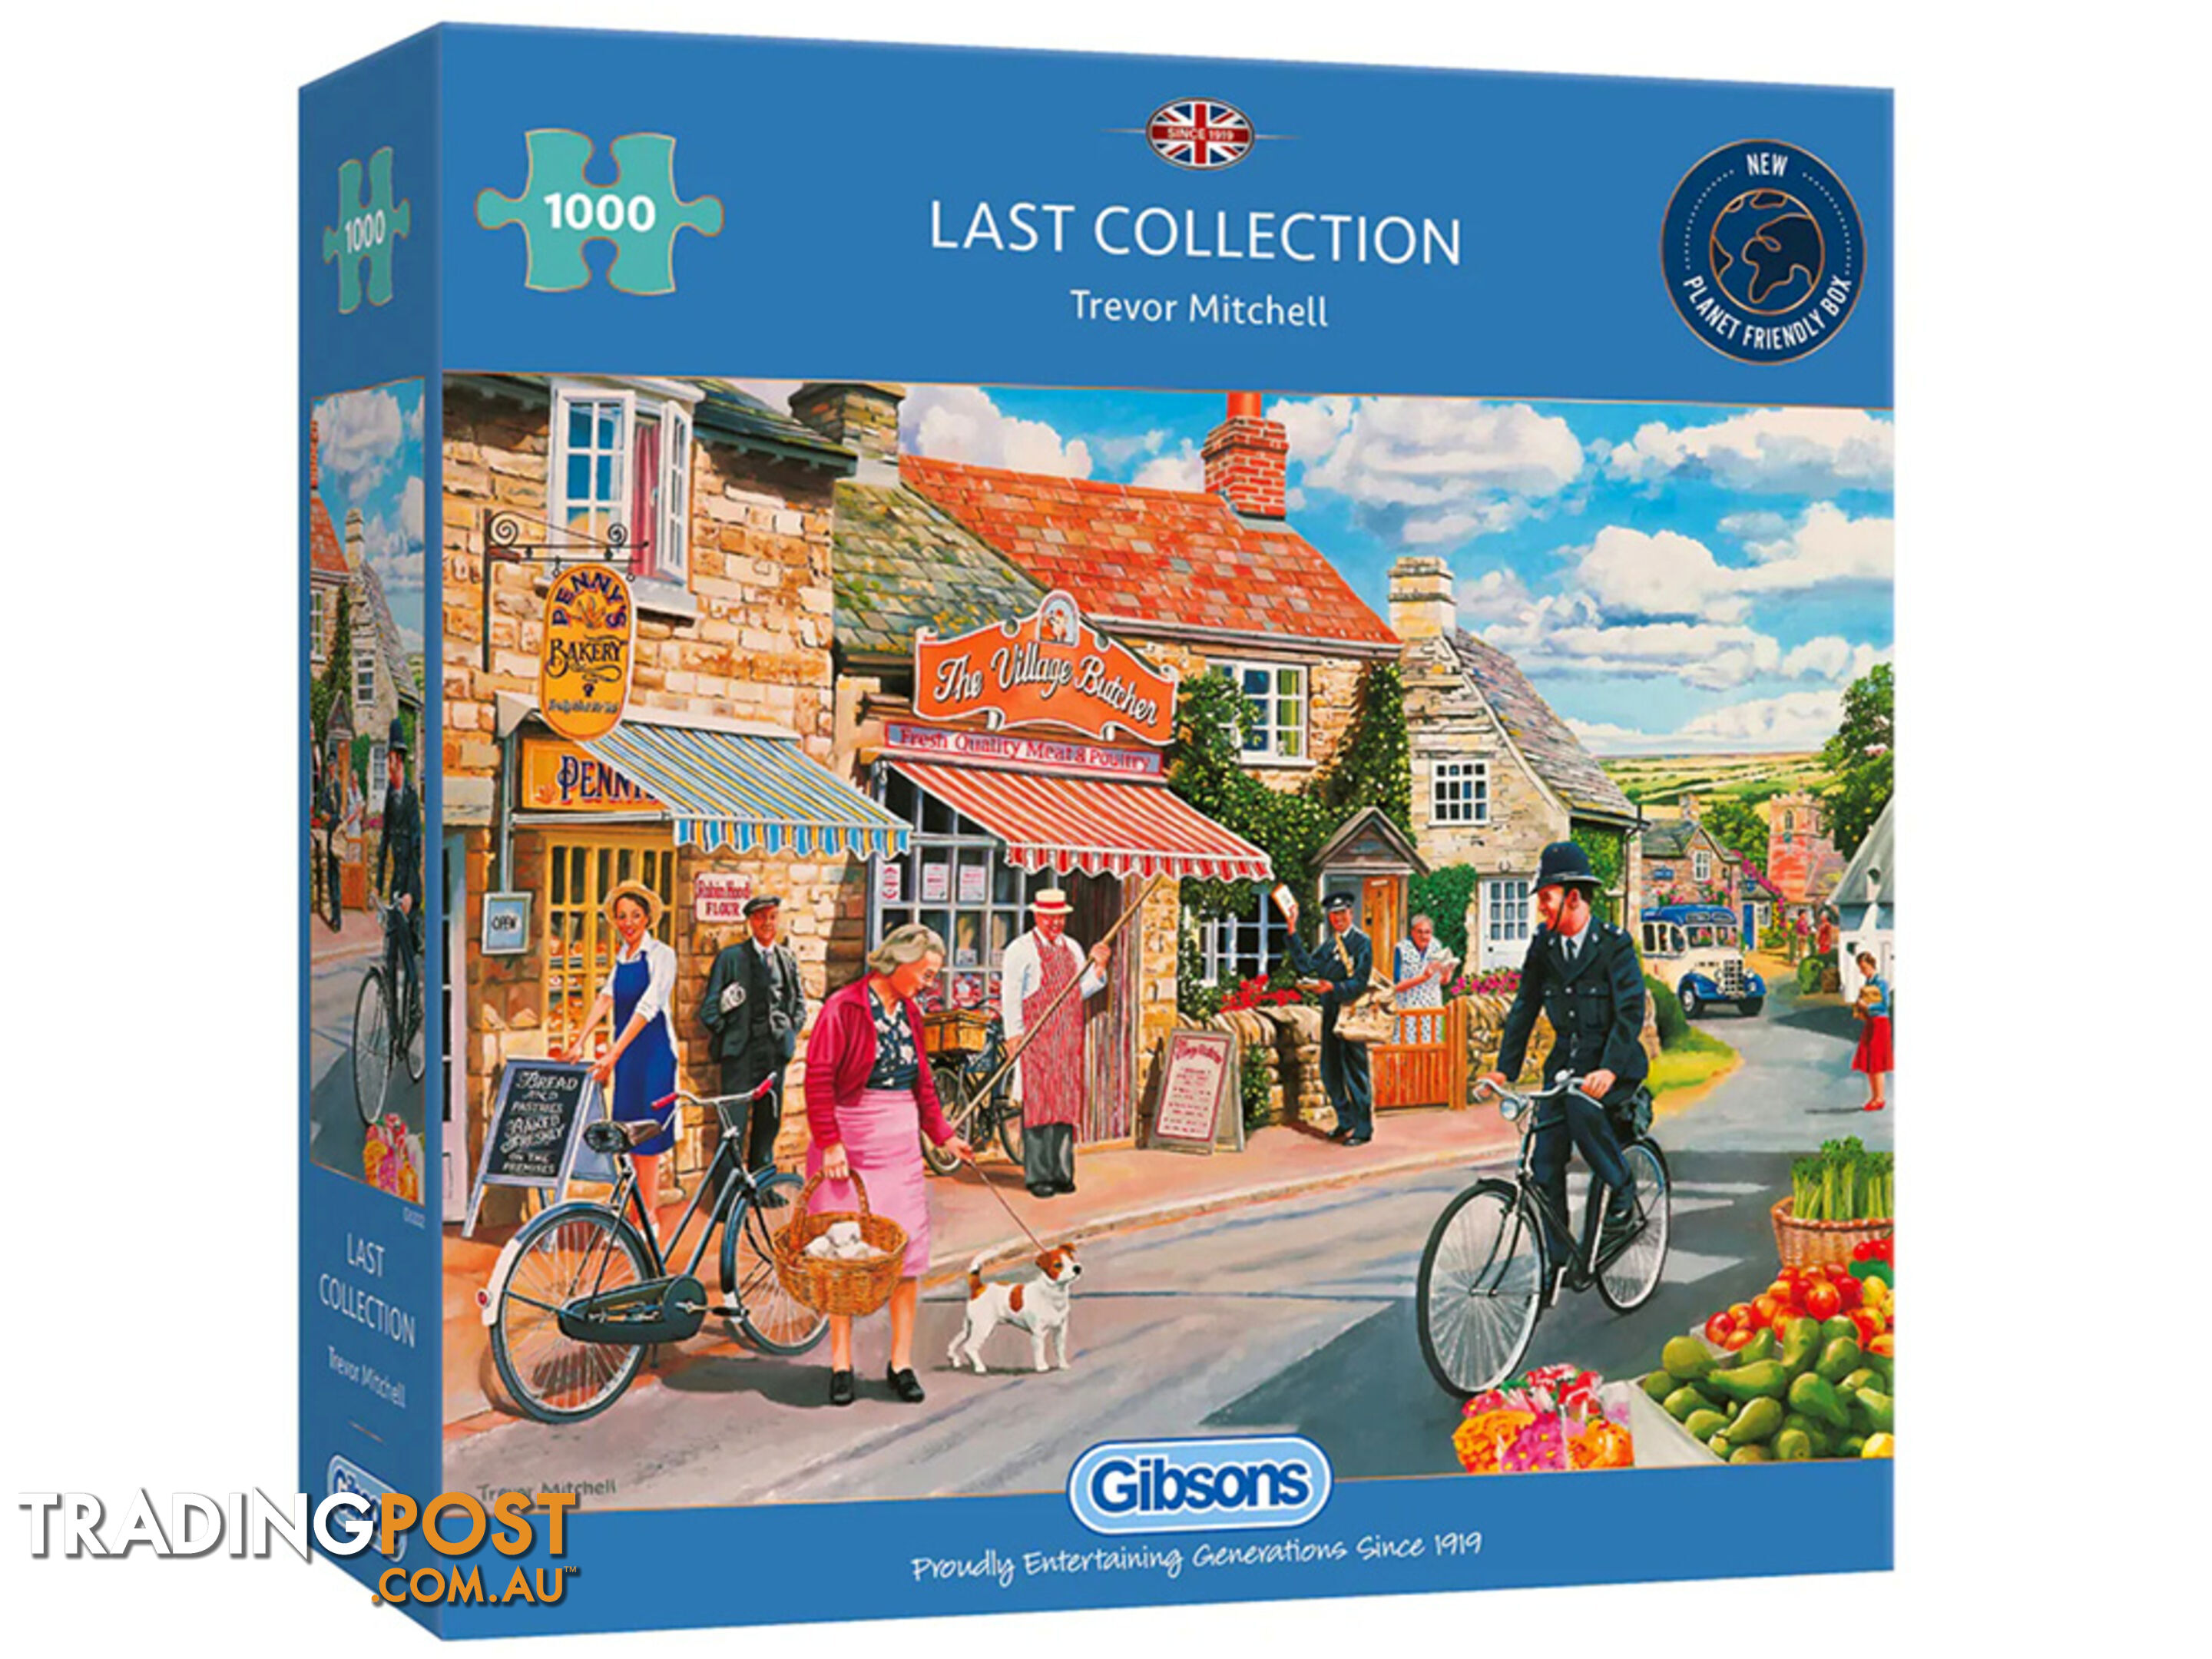 Gibsons - Last Collection Jigsaw Puzzle 1000 Pieces - Jdgib063325 - 5012269063325